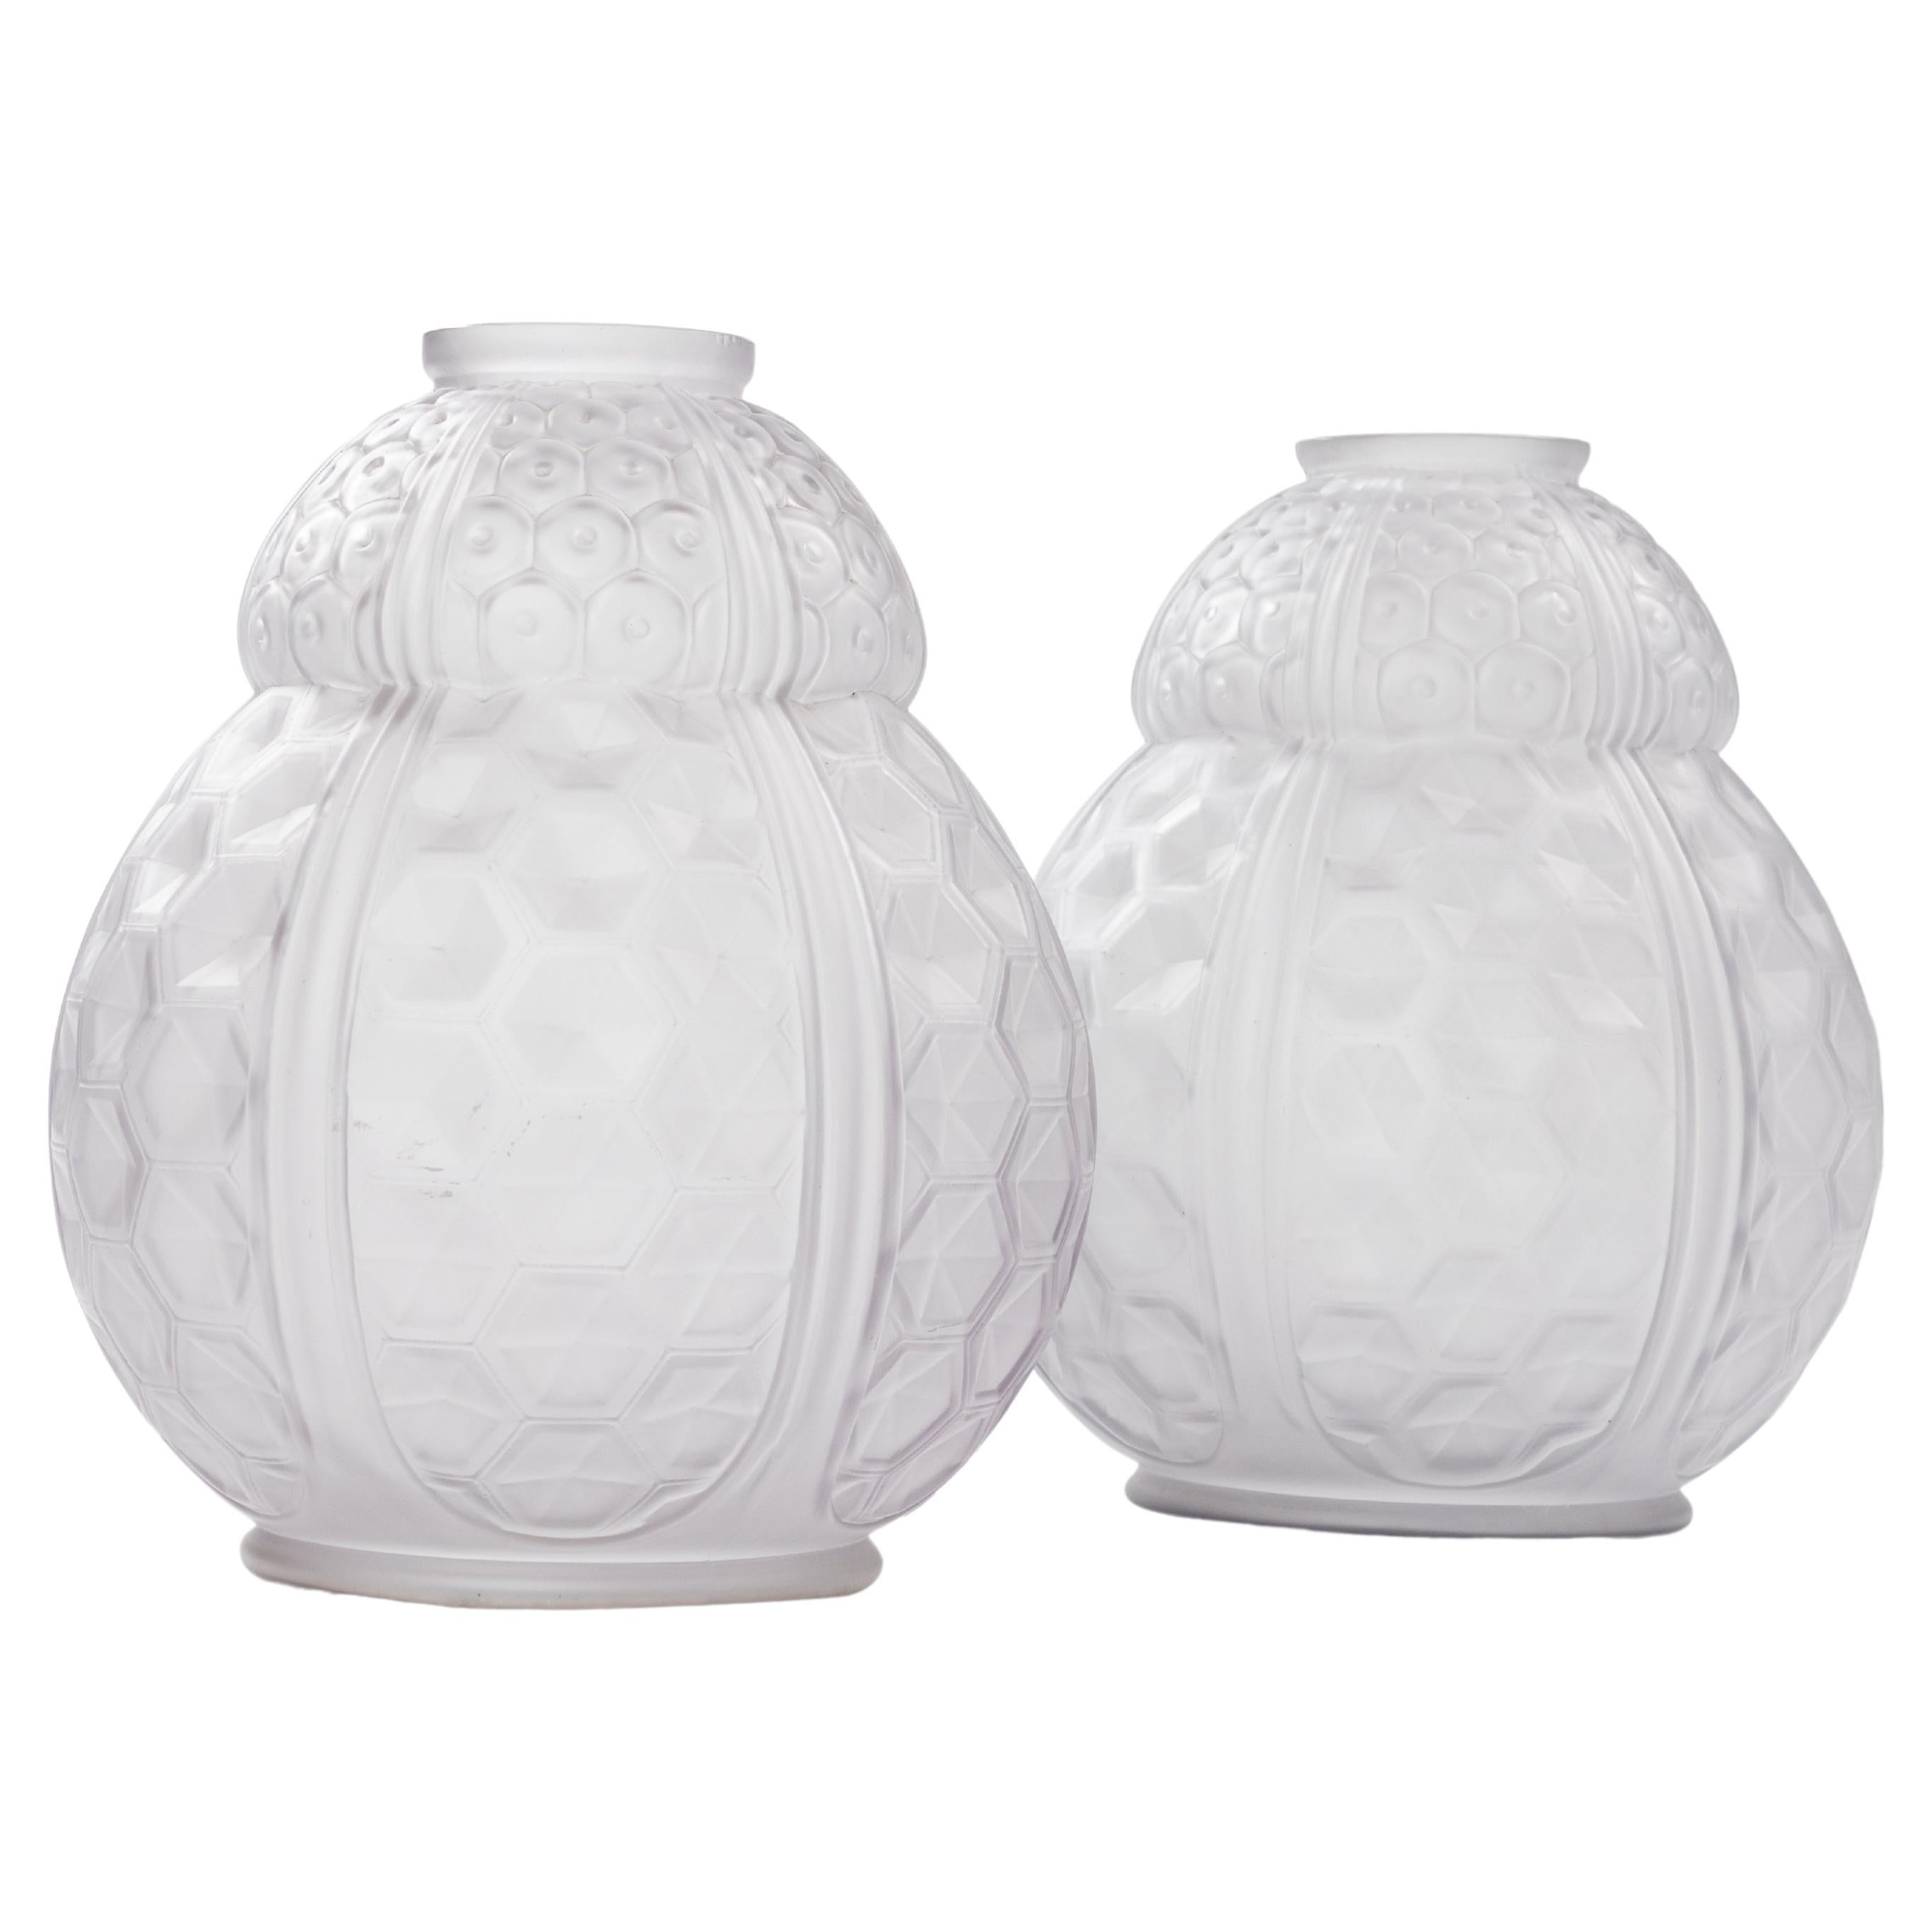 Pair of French Art Déco Art-Glass Vases in Geometric Design by Oreor, 1930s For Sale